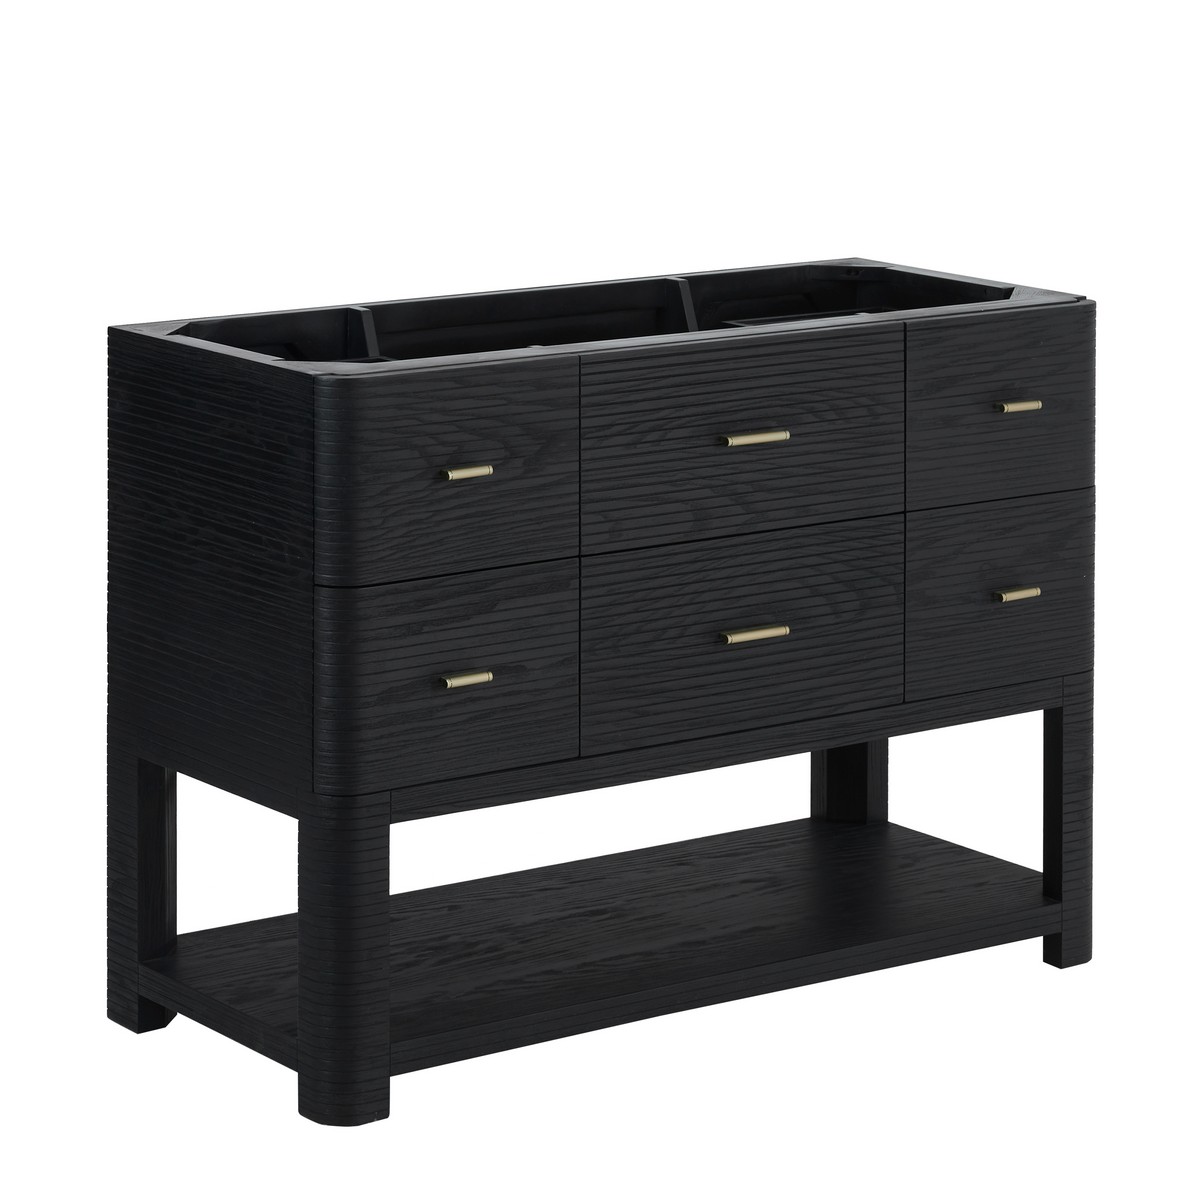 JAMES MARTIN D704-V48-CBO LUCIAN 47 3/4 INCH FREE-STANDING SINGLE SINK BATHROOM VANITY CABINET ONLY IN CARBON OAK